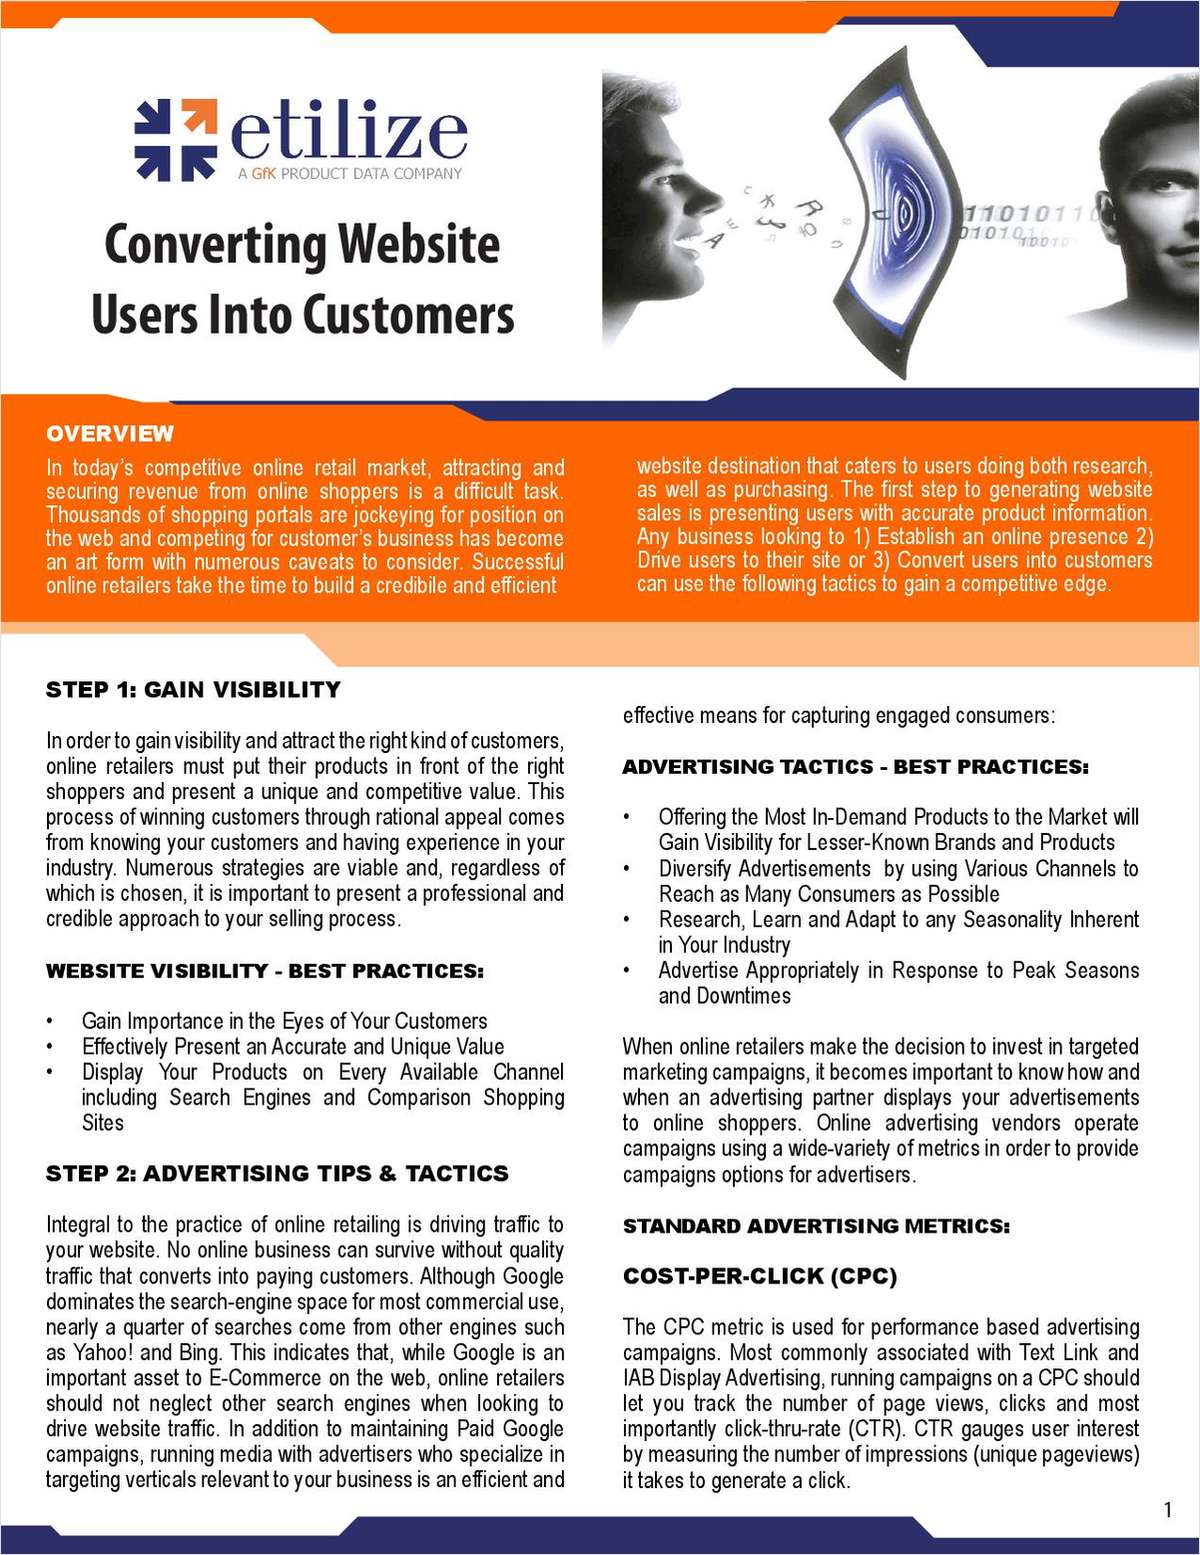 Converting Website Users into Customers